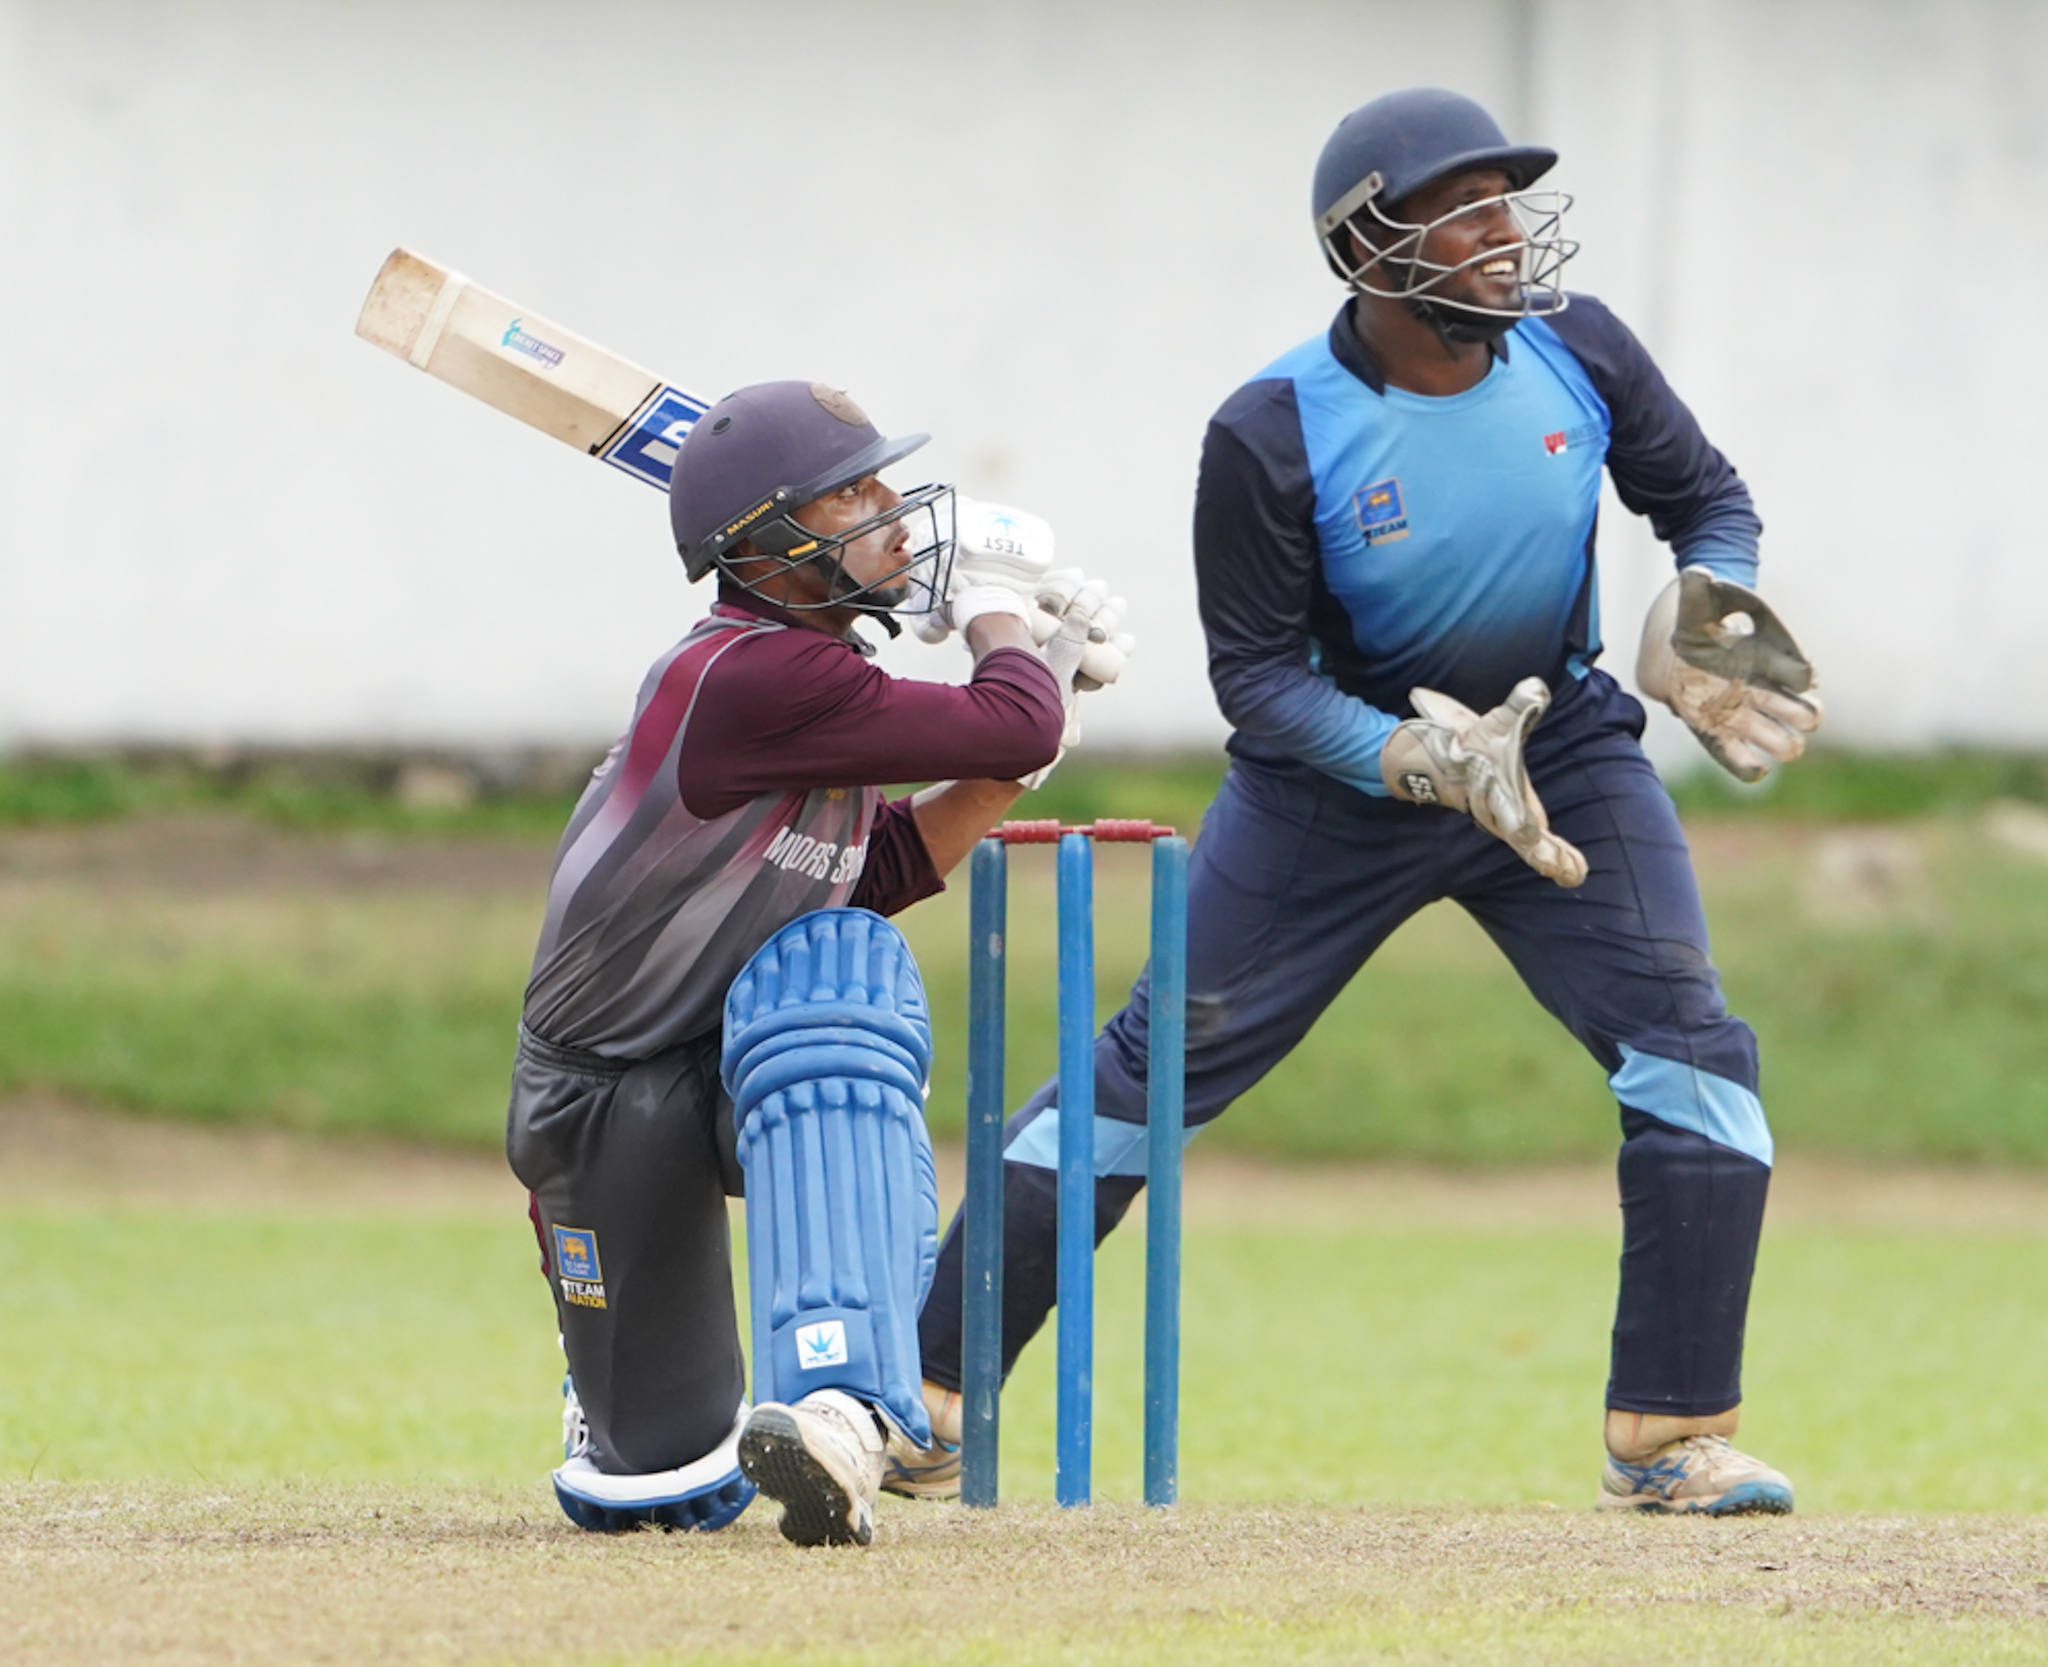 Kamindu Mendis 117 in Chilaw Marians 109-run win over Negombo CC the pick of the matches